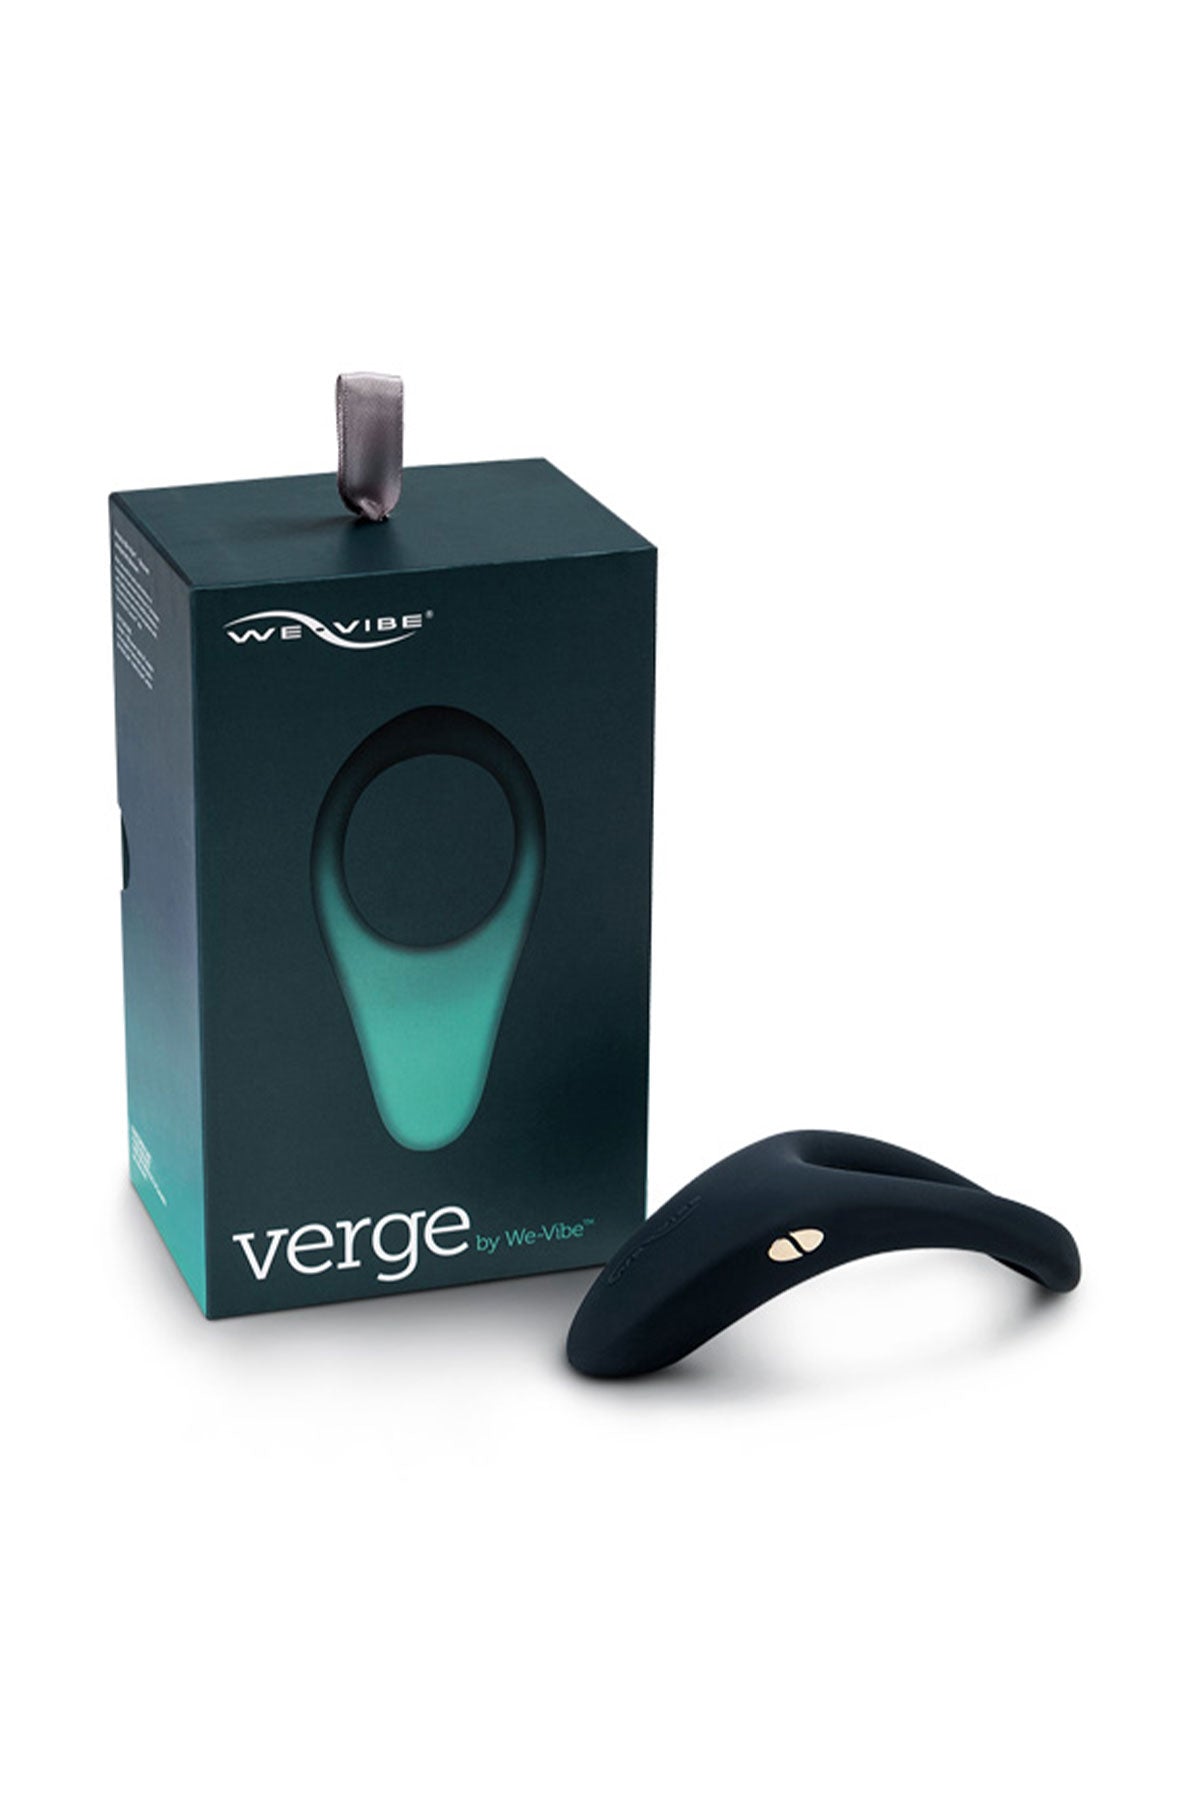 Verge Vibrating Cock Ring box by We-Vibe